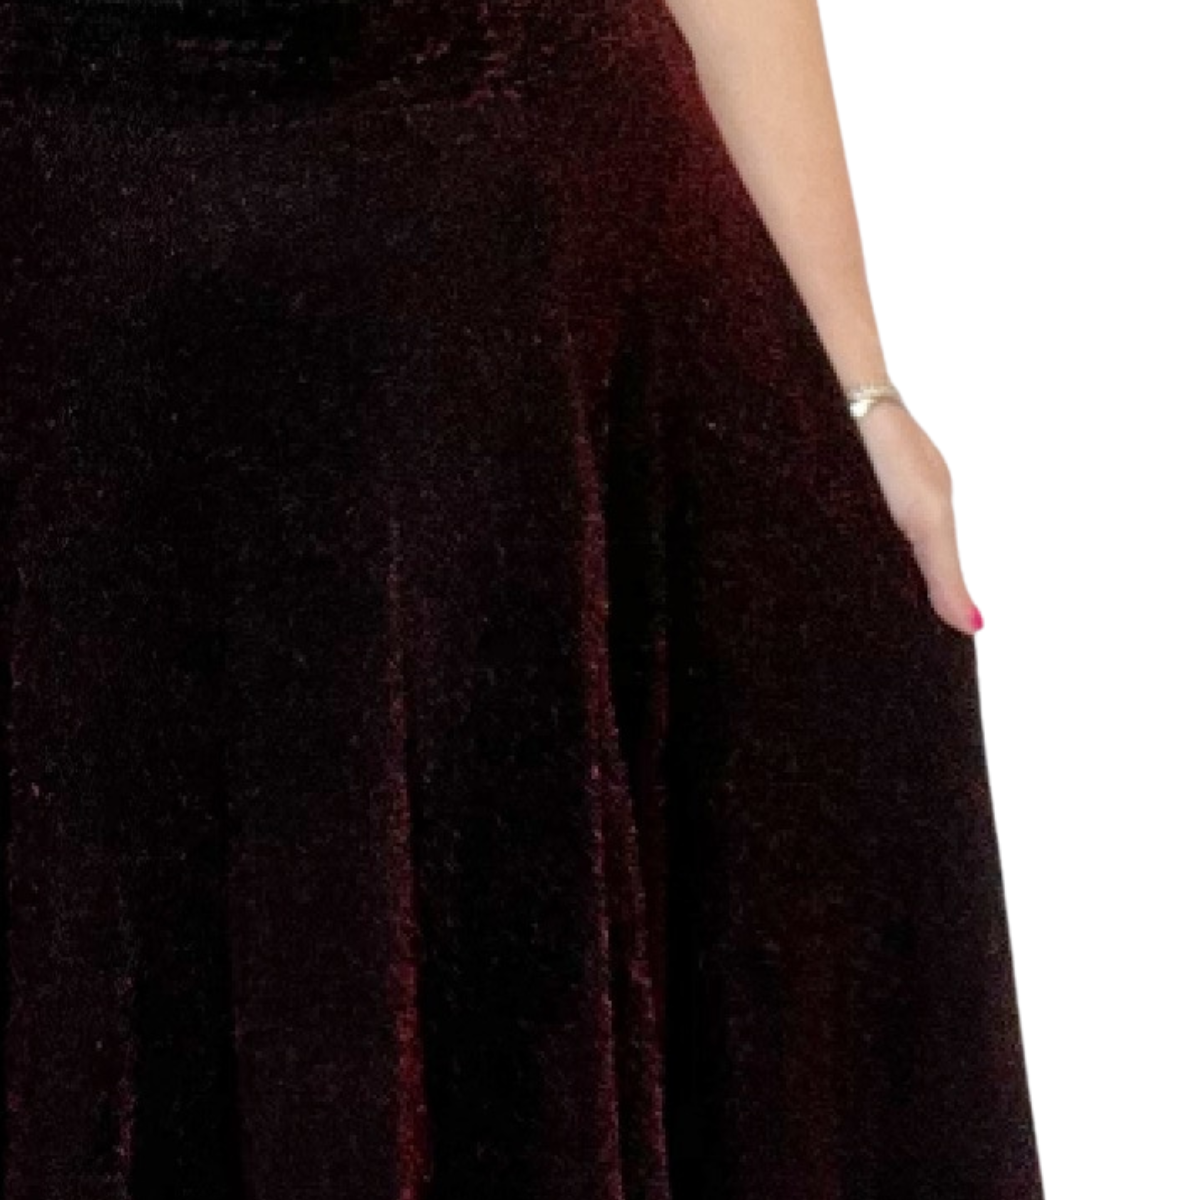 SPARKLY ELASTIC WAIST A-LINE SWING SKIRT PARTY EVENING STYLE